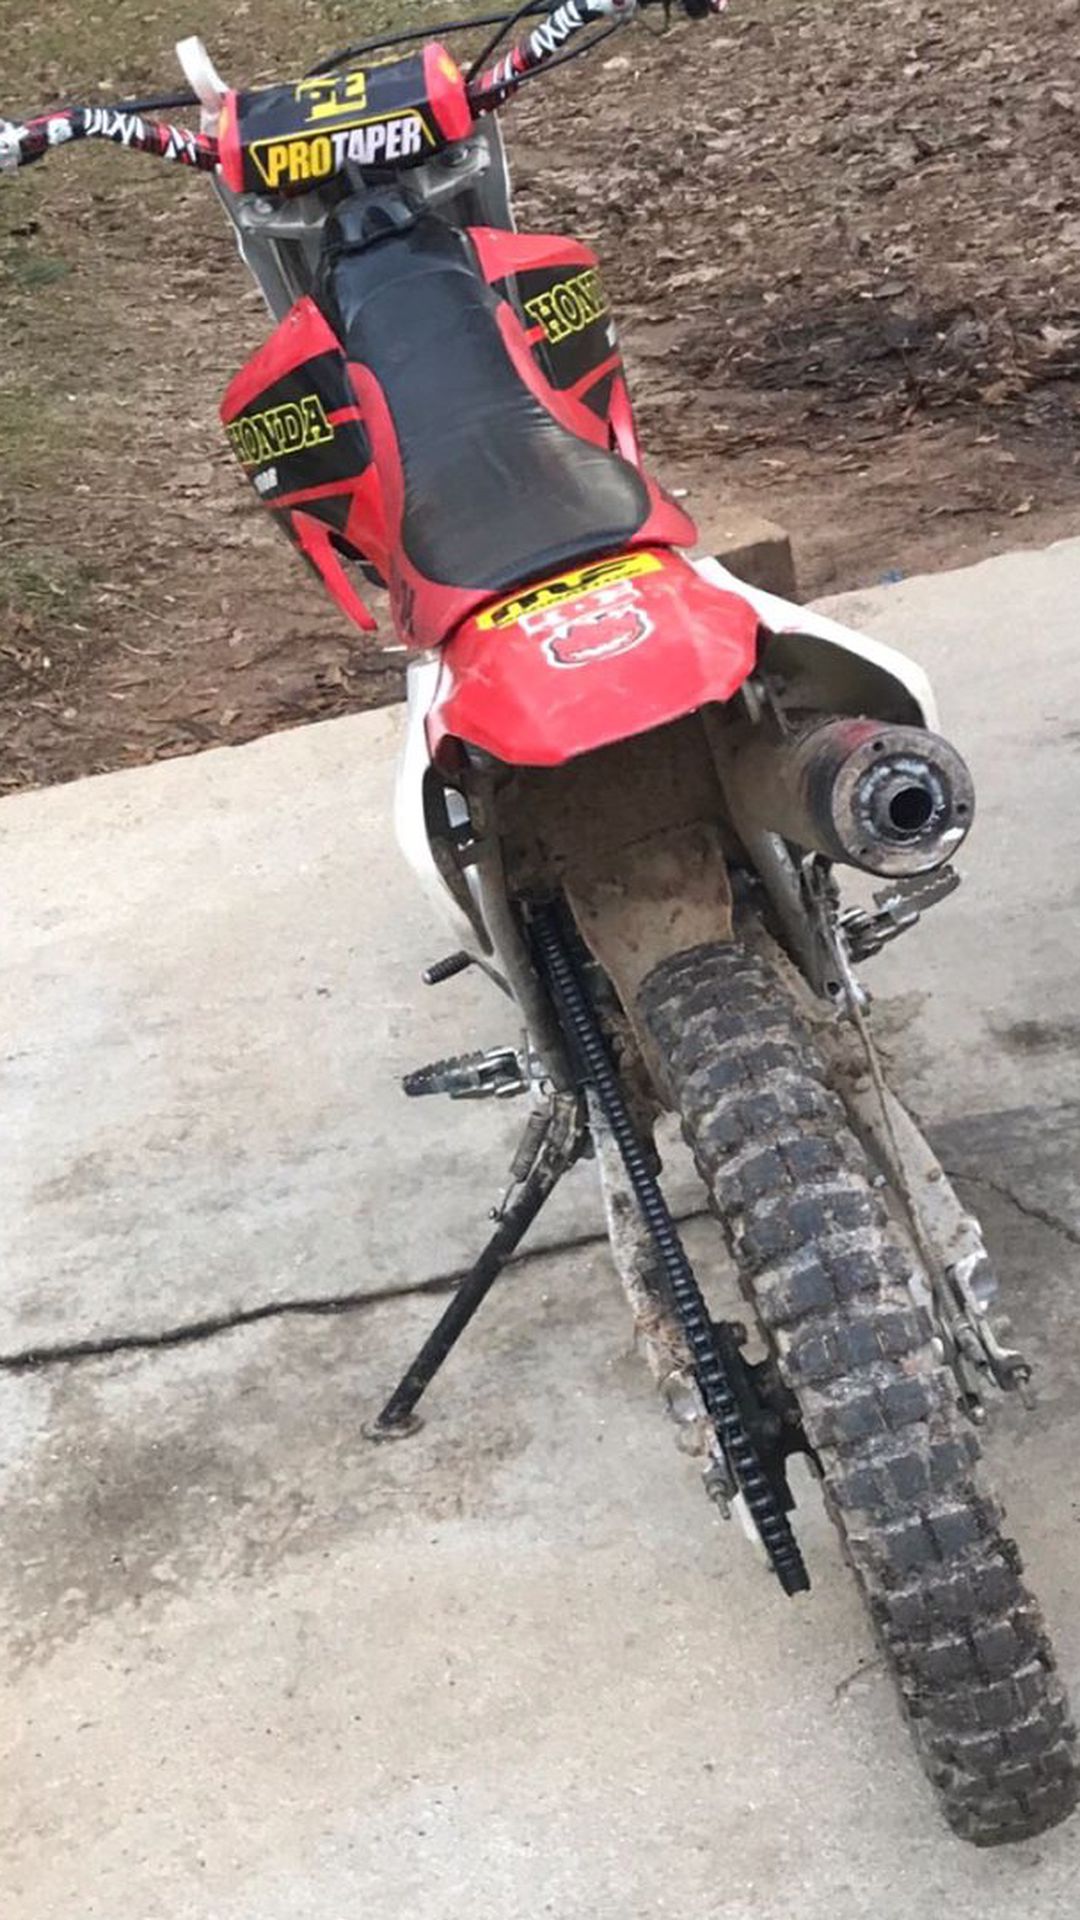 01 Xr100r And Crf Parts Bike Trades Welcome